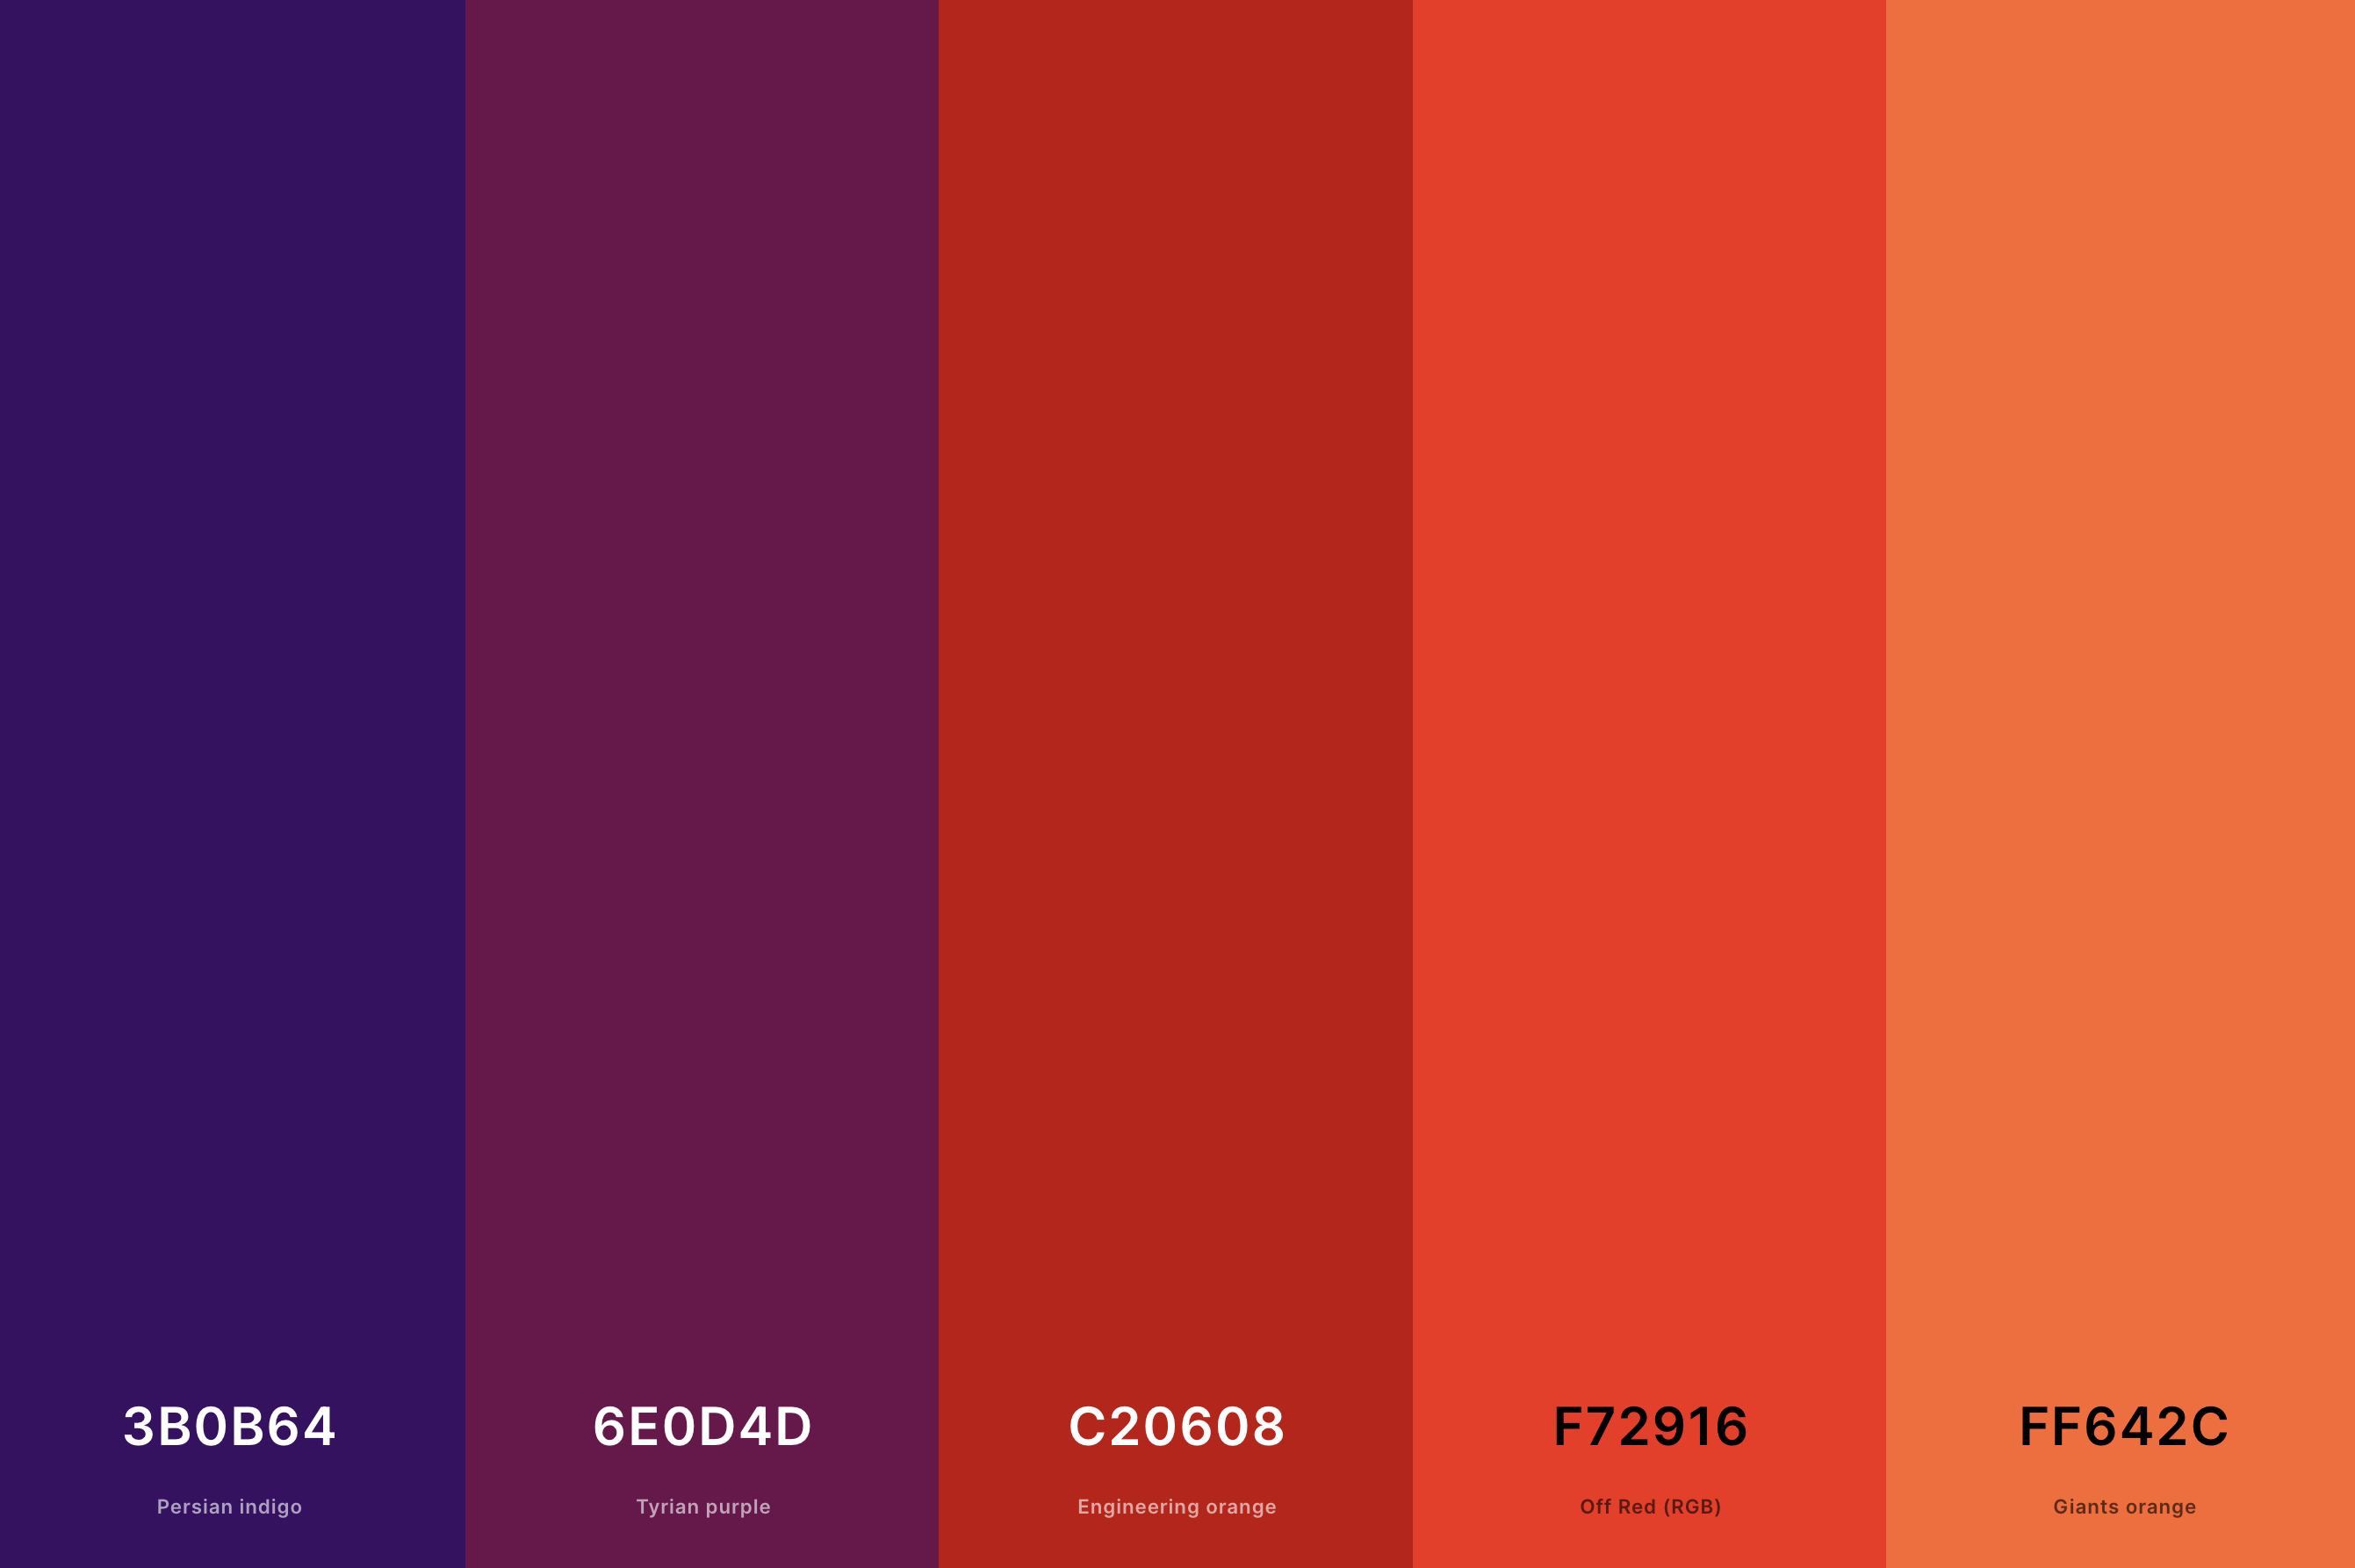 12. Dark Sunset Color Palette Color Palette with Persian Indigo (Hex #3B0B64) + Tyrian Purple (Hex #6E0D4D) + Engineering Orange (Hex #C20608) + Off Red (Rgb) (Hex #F72916) + Giants Orange (Hex #FF642C) Color Palette with Hex Codes